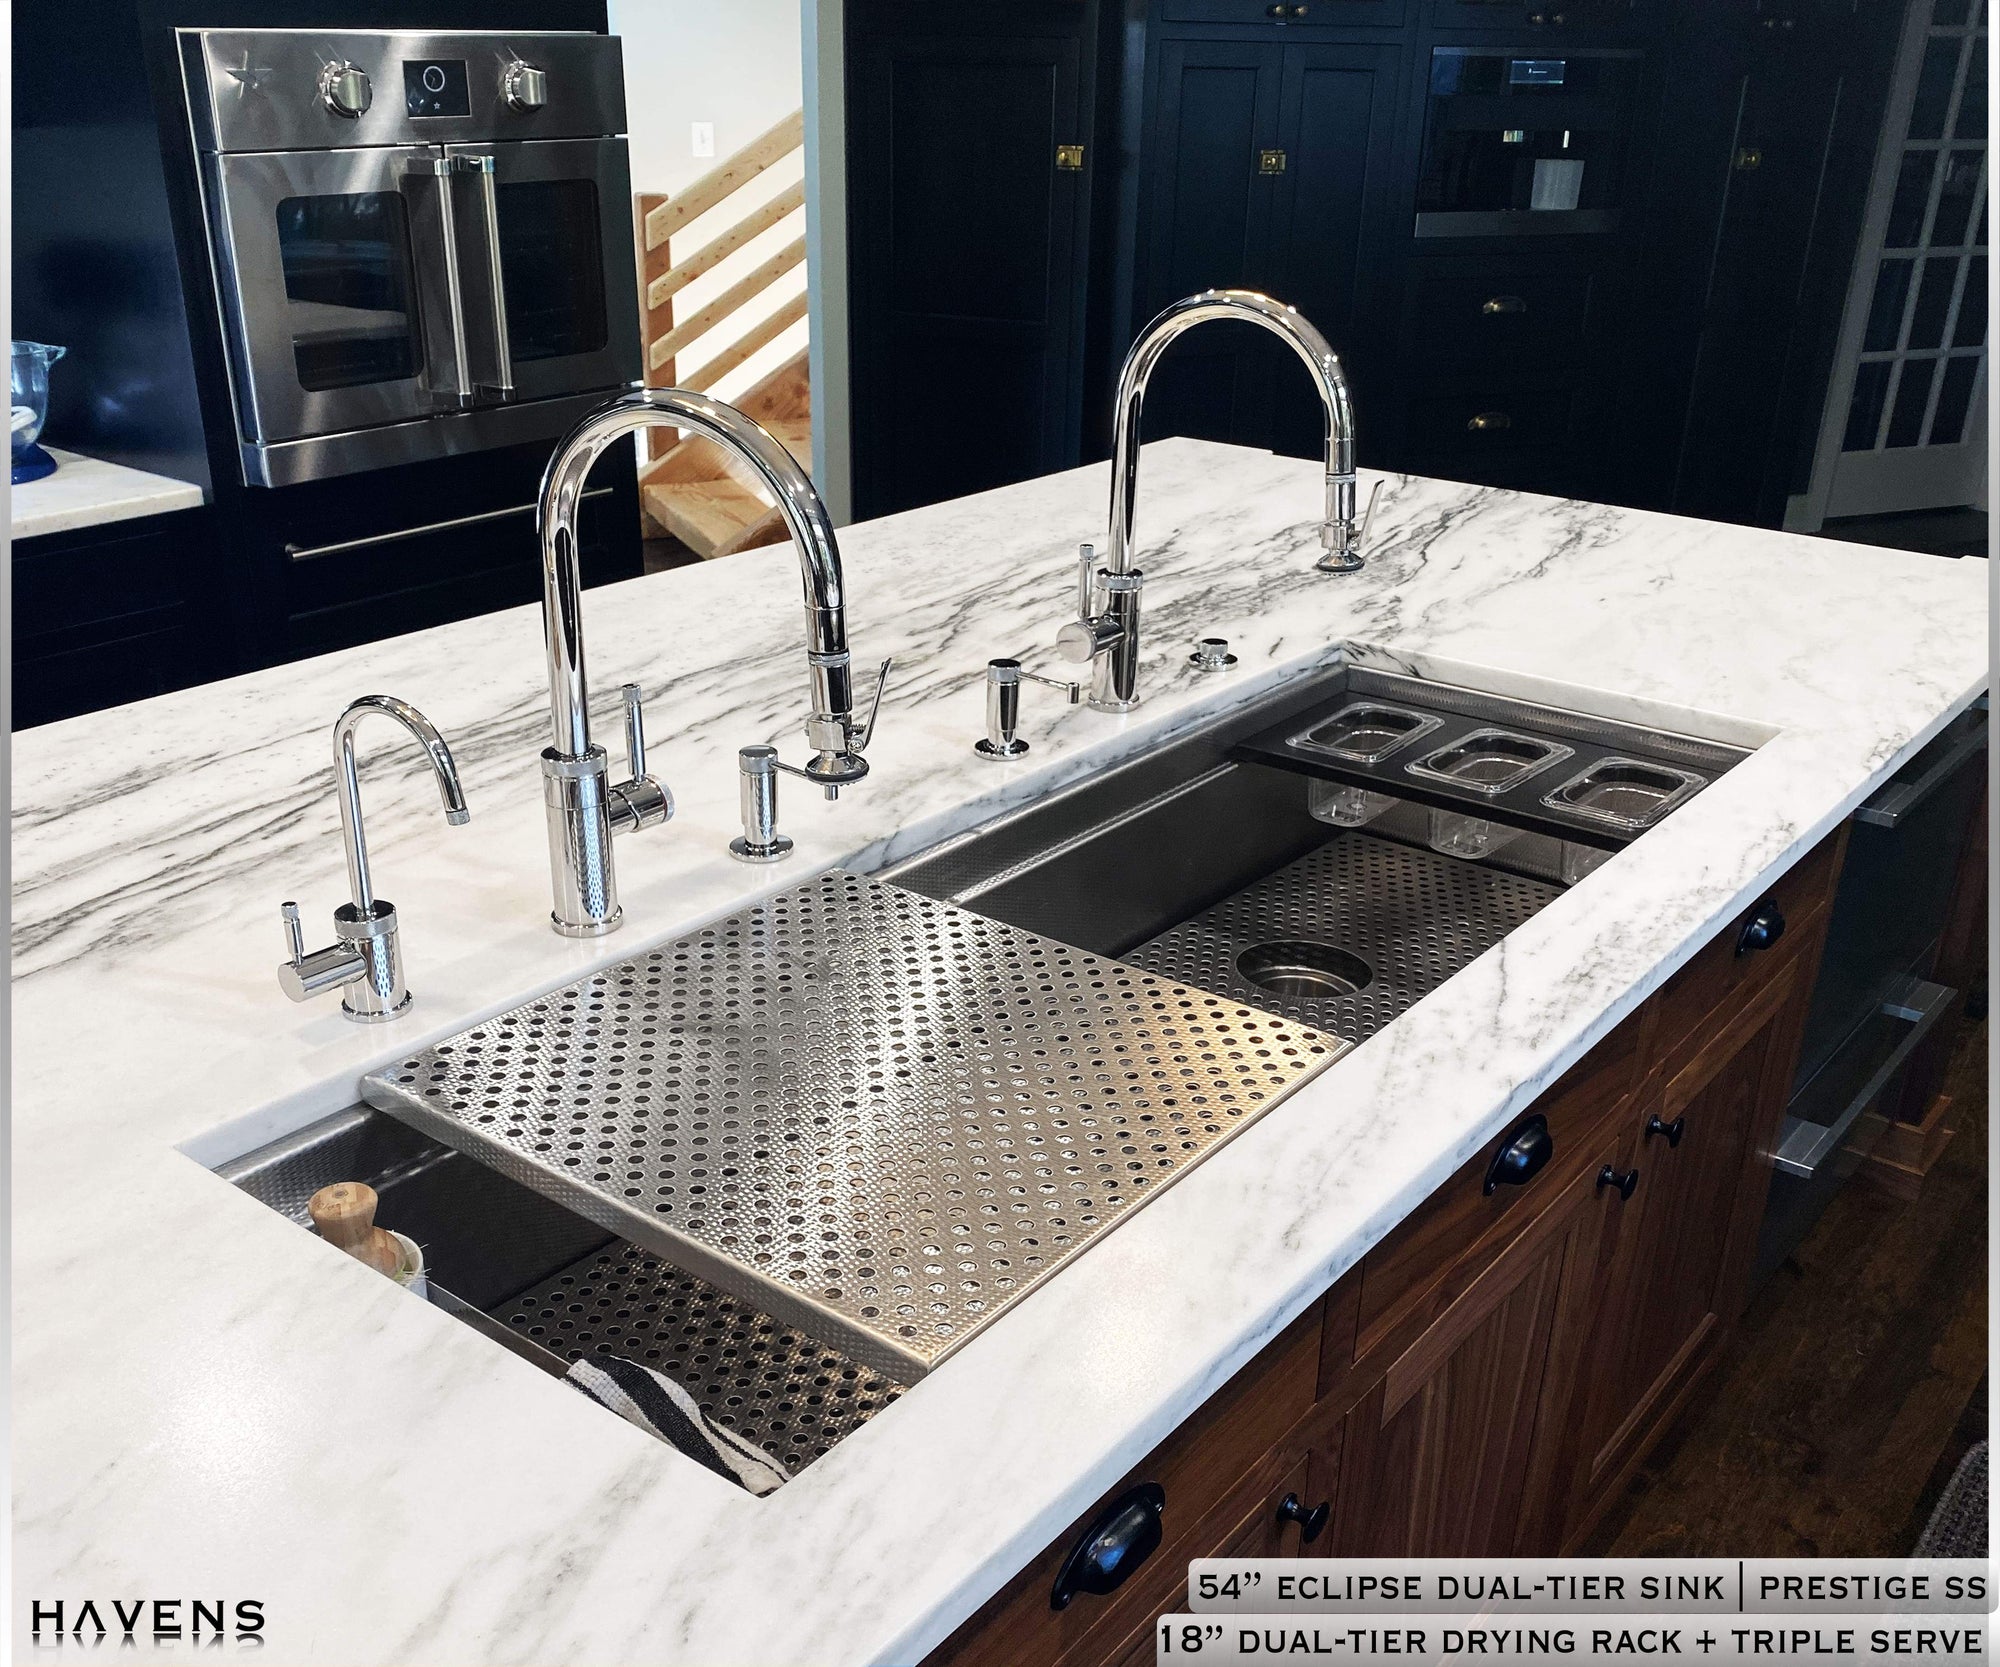 Custom Eclipse Dual-Tier Sink - Stainless